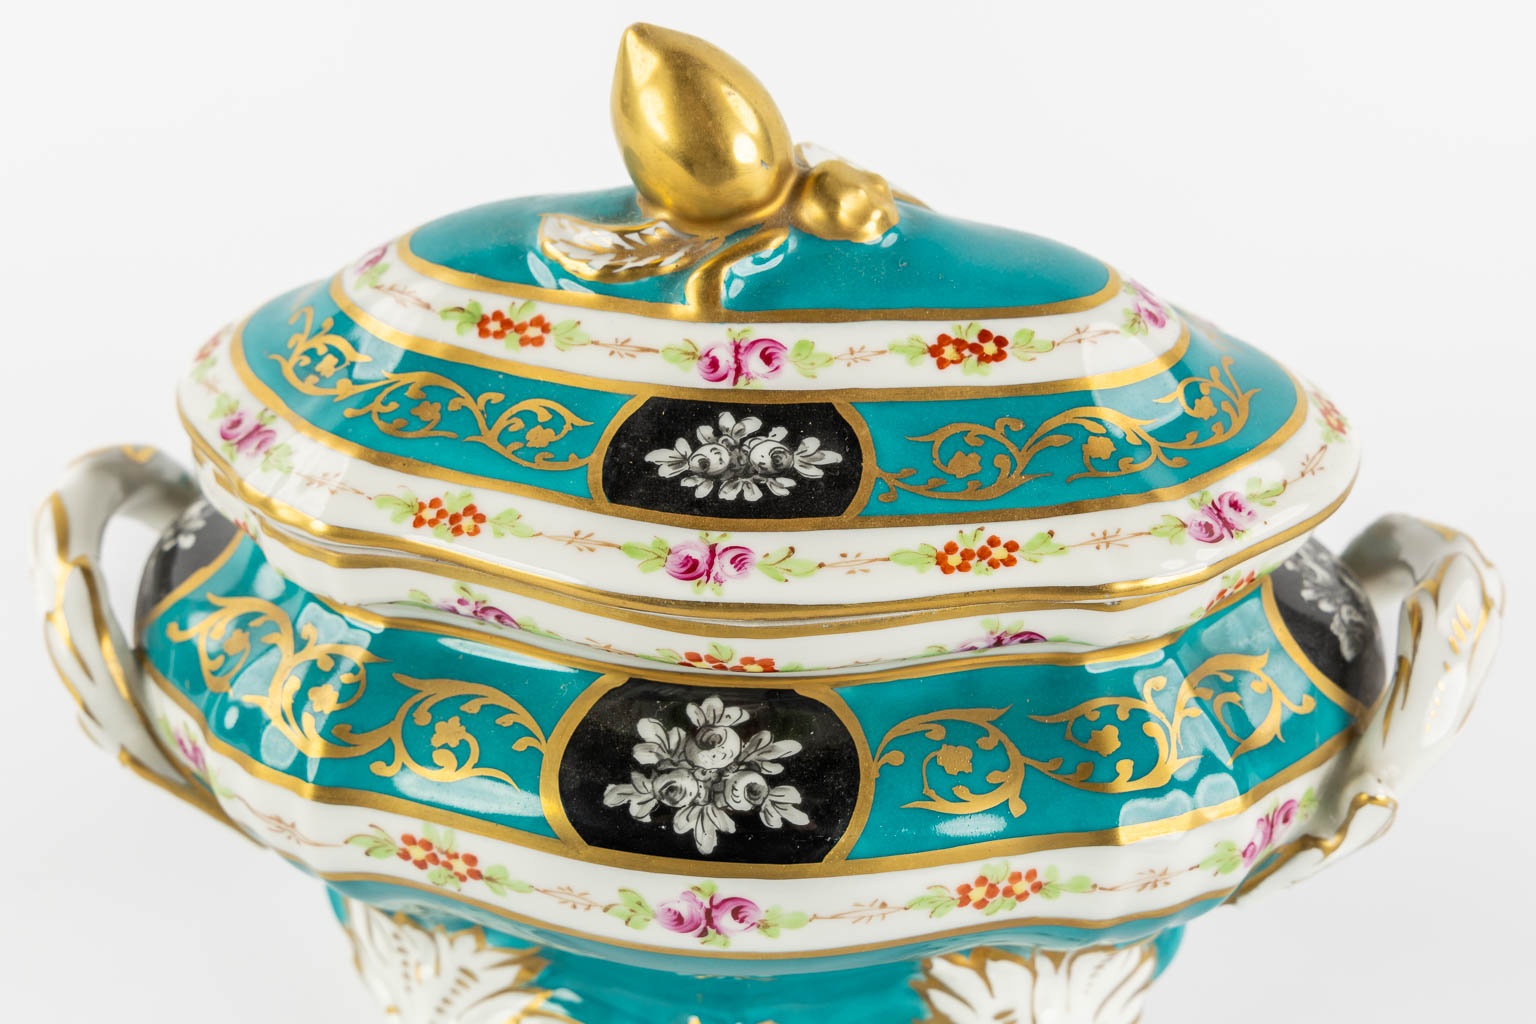 Pillivuyt, Paris, a tureen on a plate and an oval bowl. 20th C. (L:23 x W:36 x H:20 cm)